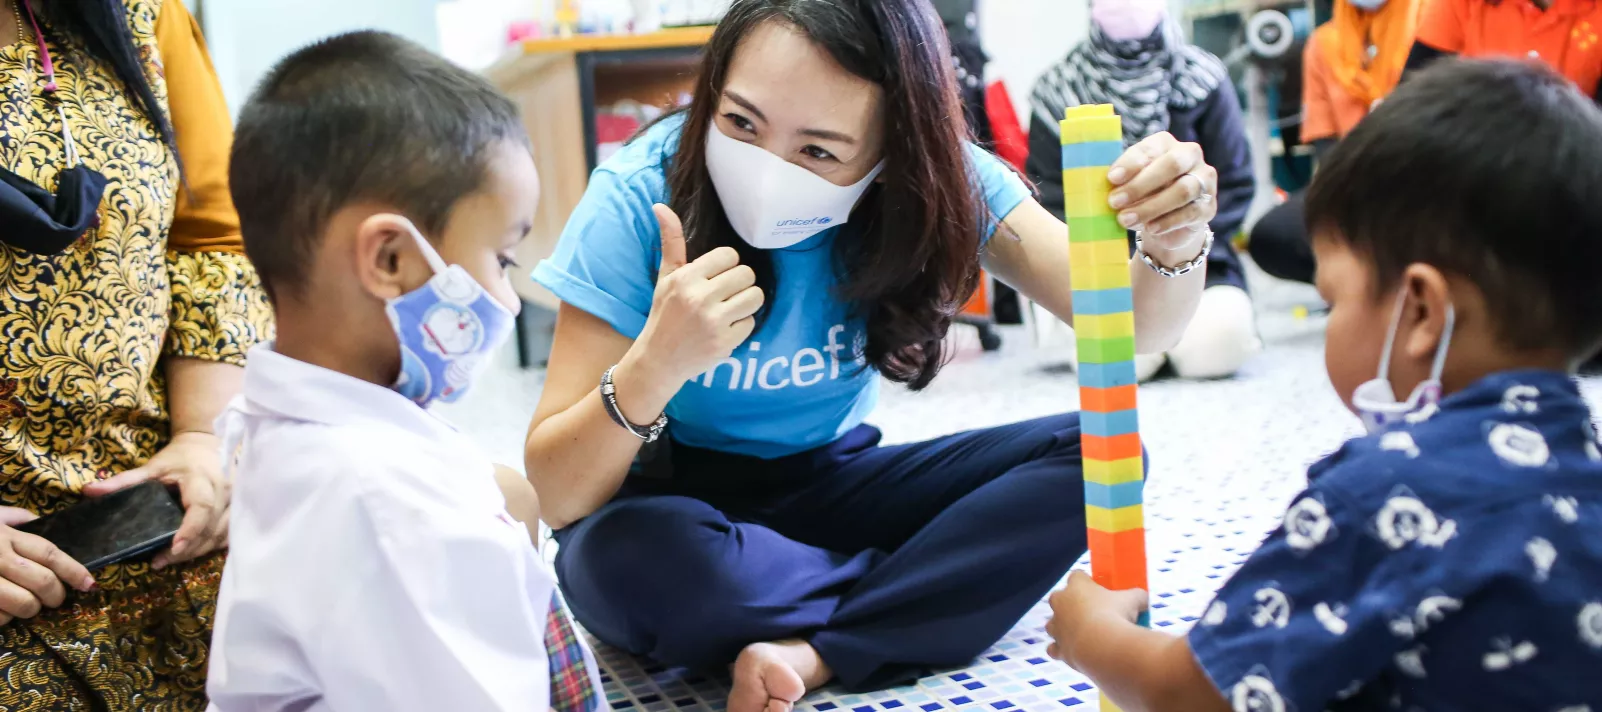 UNICEF Representative for Thailand playing with a young child